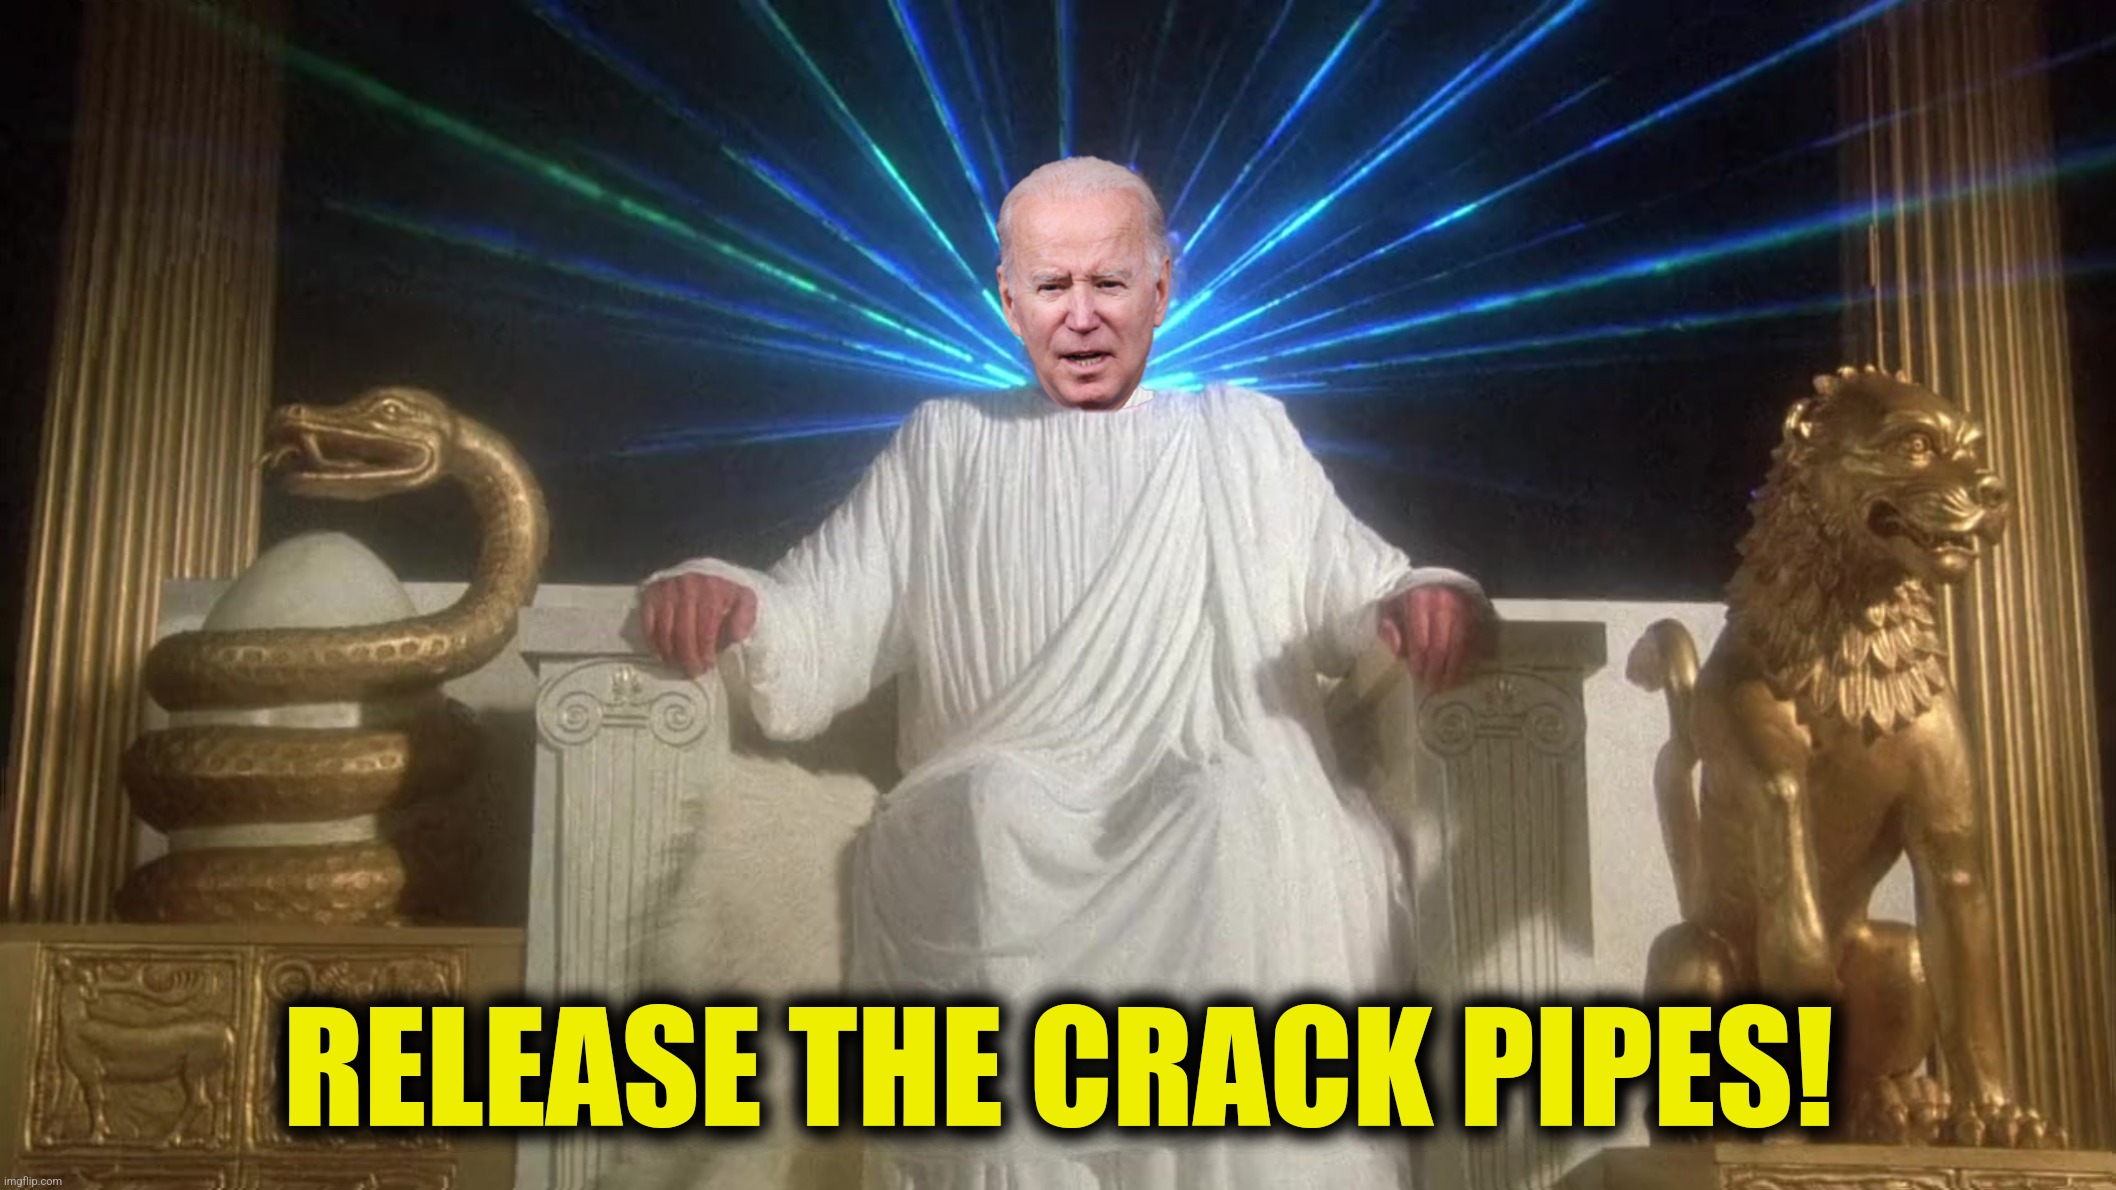 RELEASE THE CRACK PIPES! | made w/ Imgflip meme maker